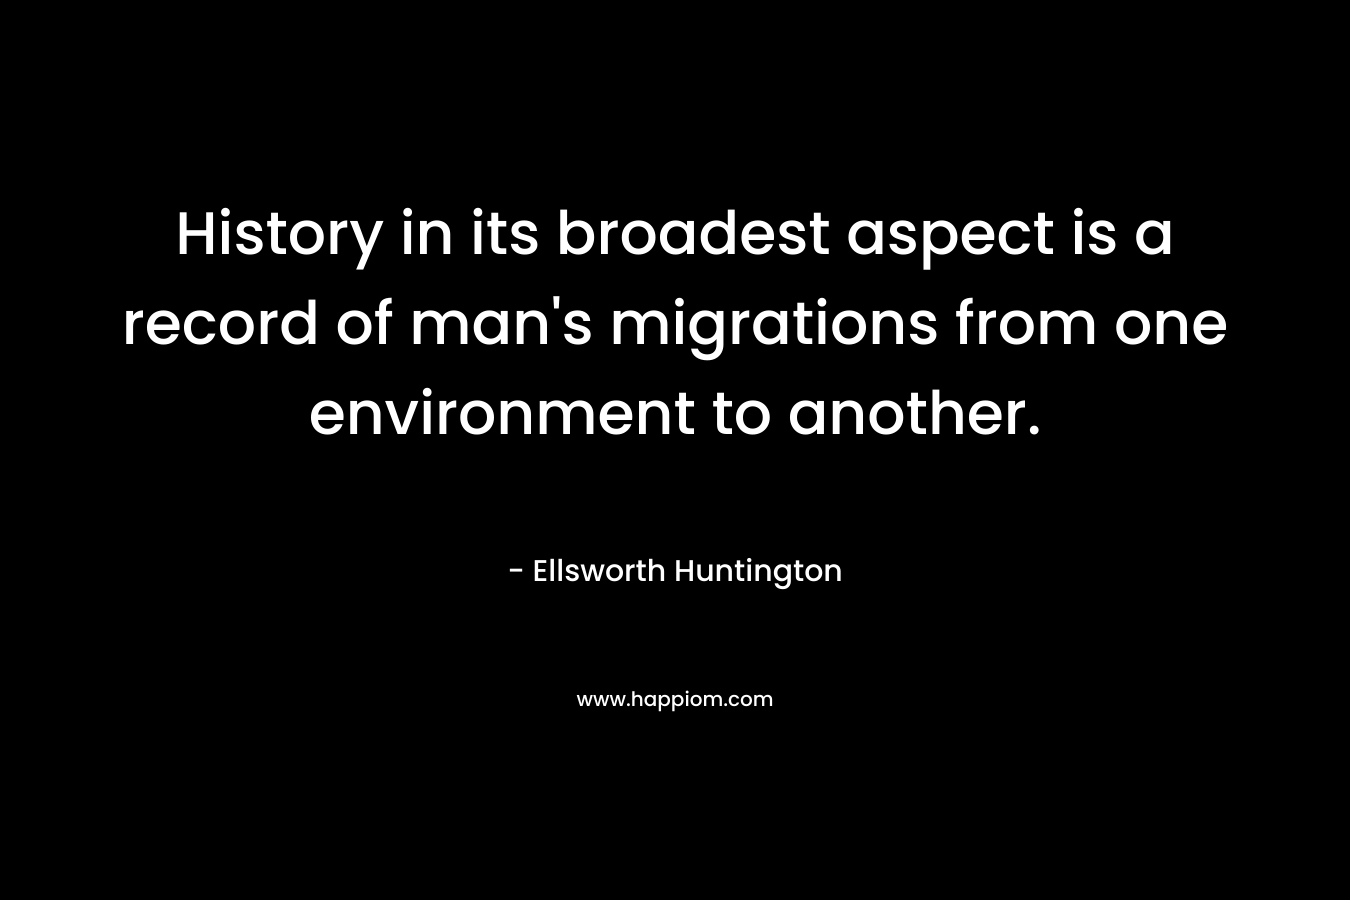 History in its broadest aspect is a record of man’s migrations from one environment to another. – Ellsworth Huntington